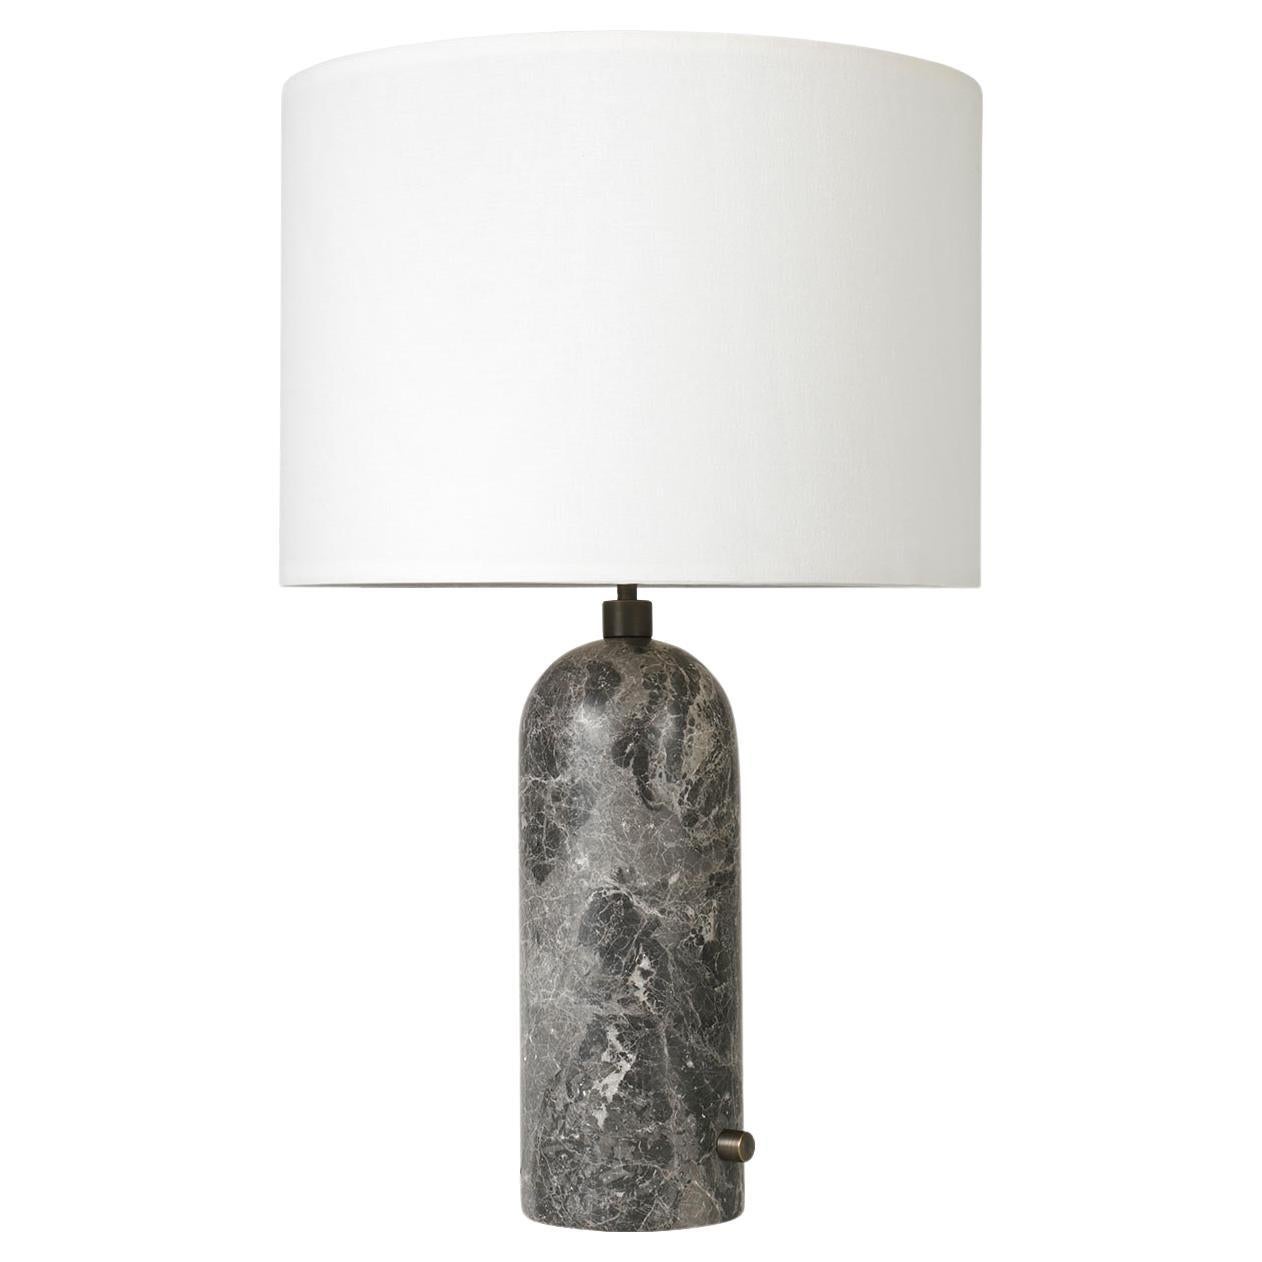 Gravity Table Lamp - Large, Grey Marble, White